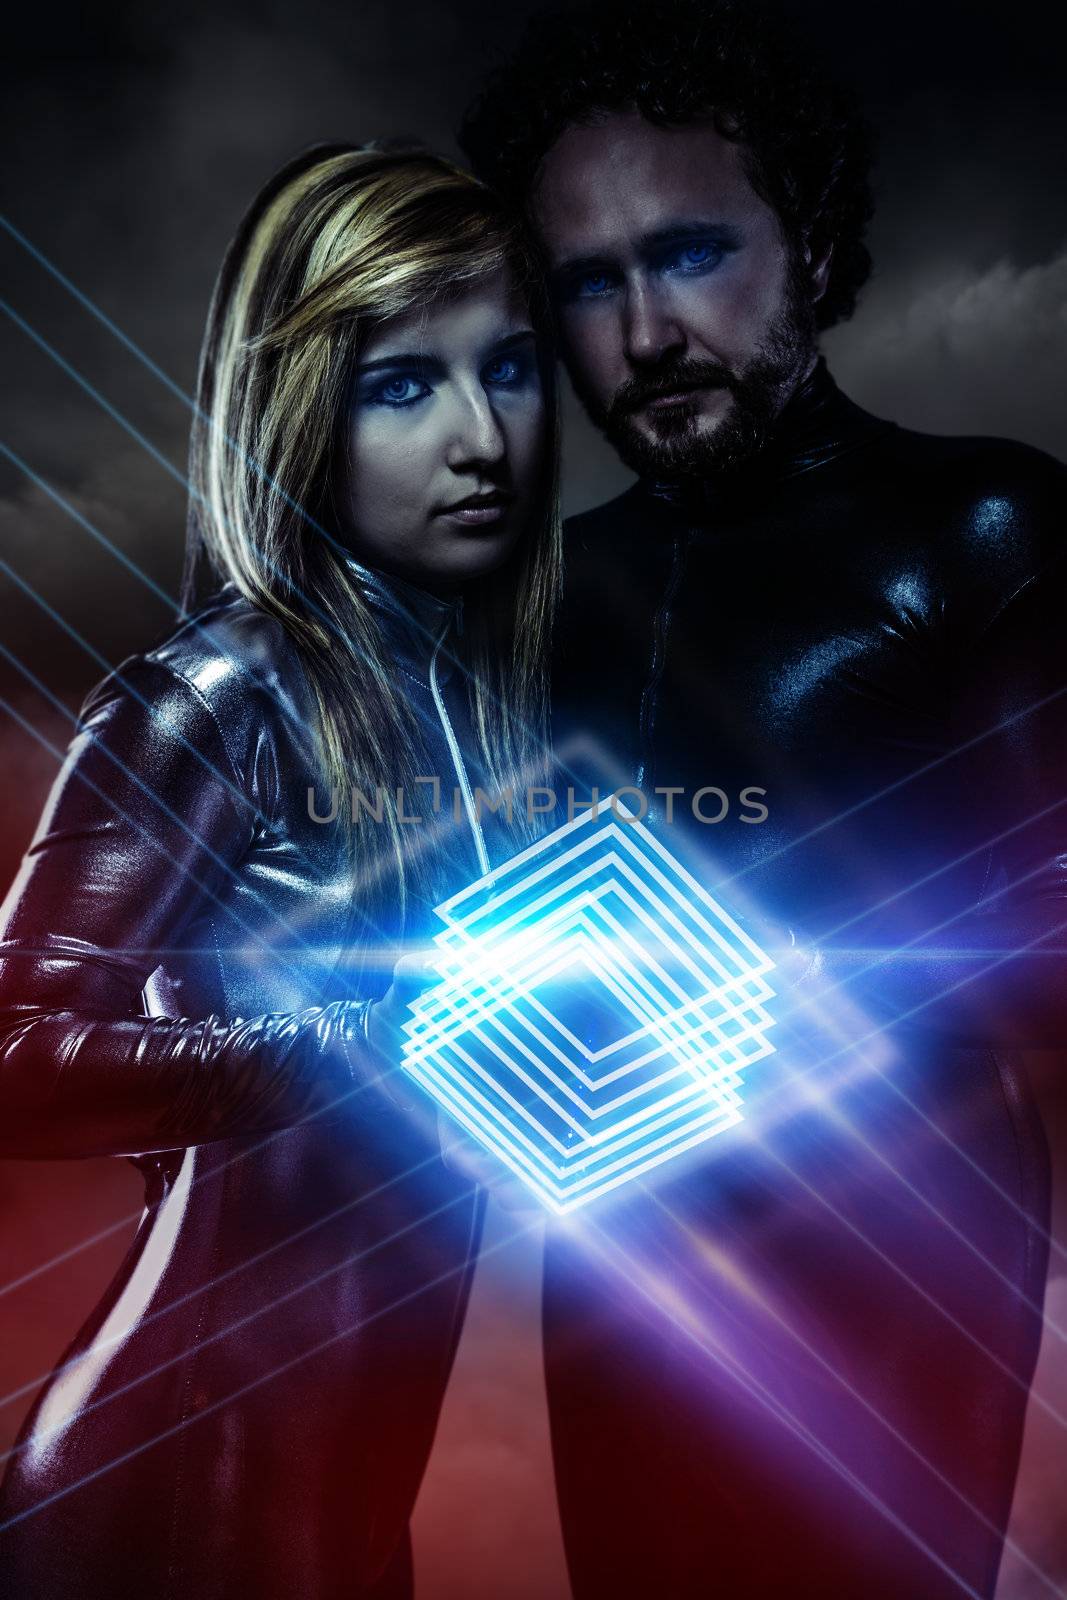 Lovers, couple of super heroes of the future holding a blue square